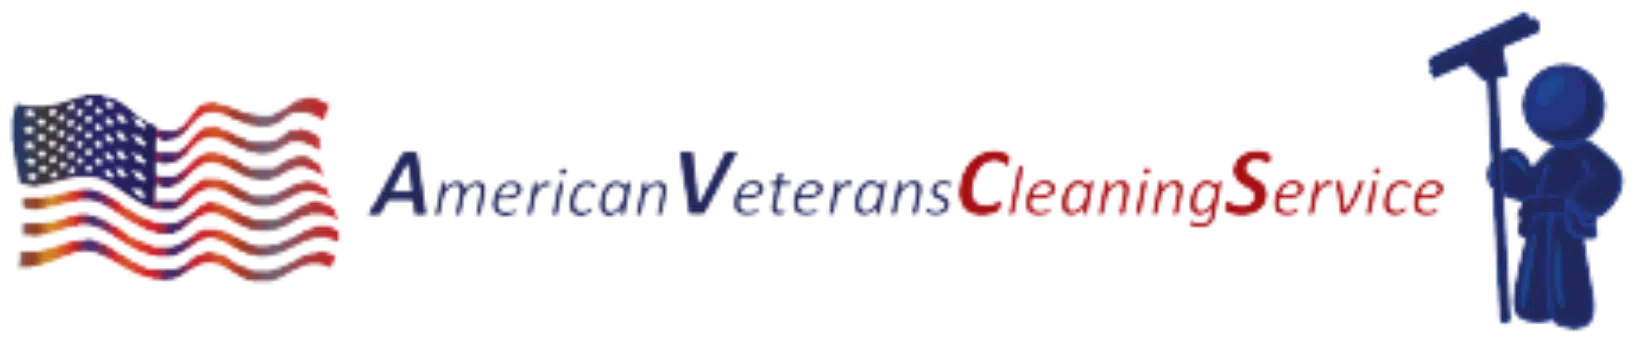 American Veterans Cleaning Service